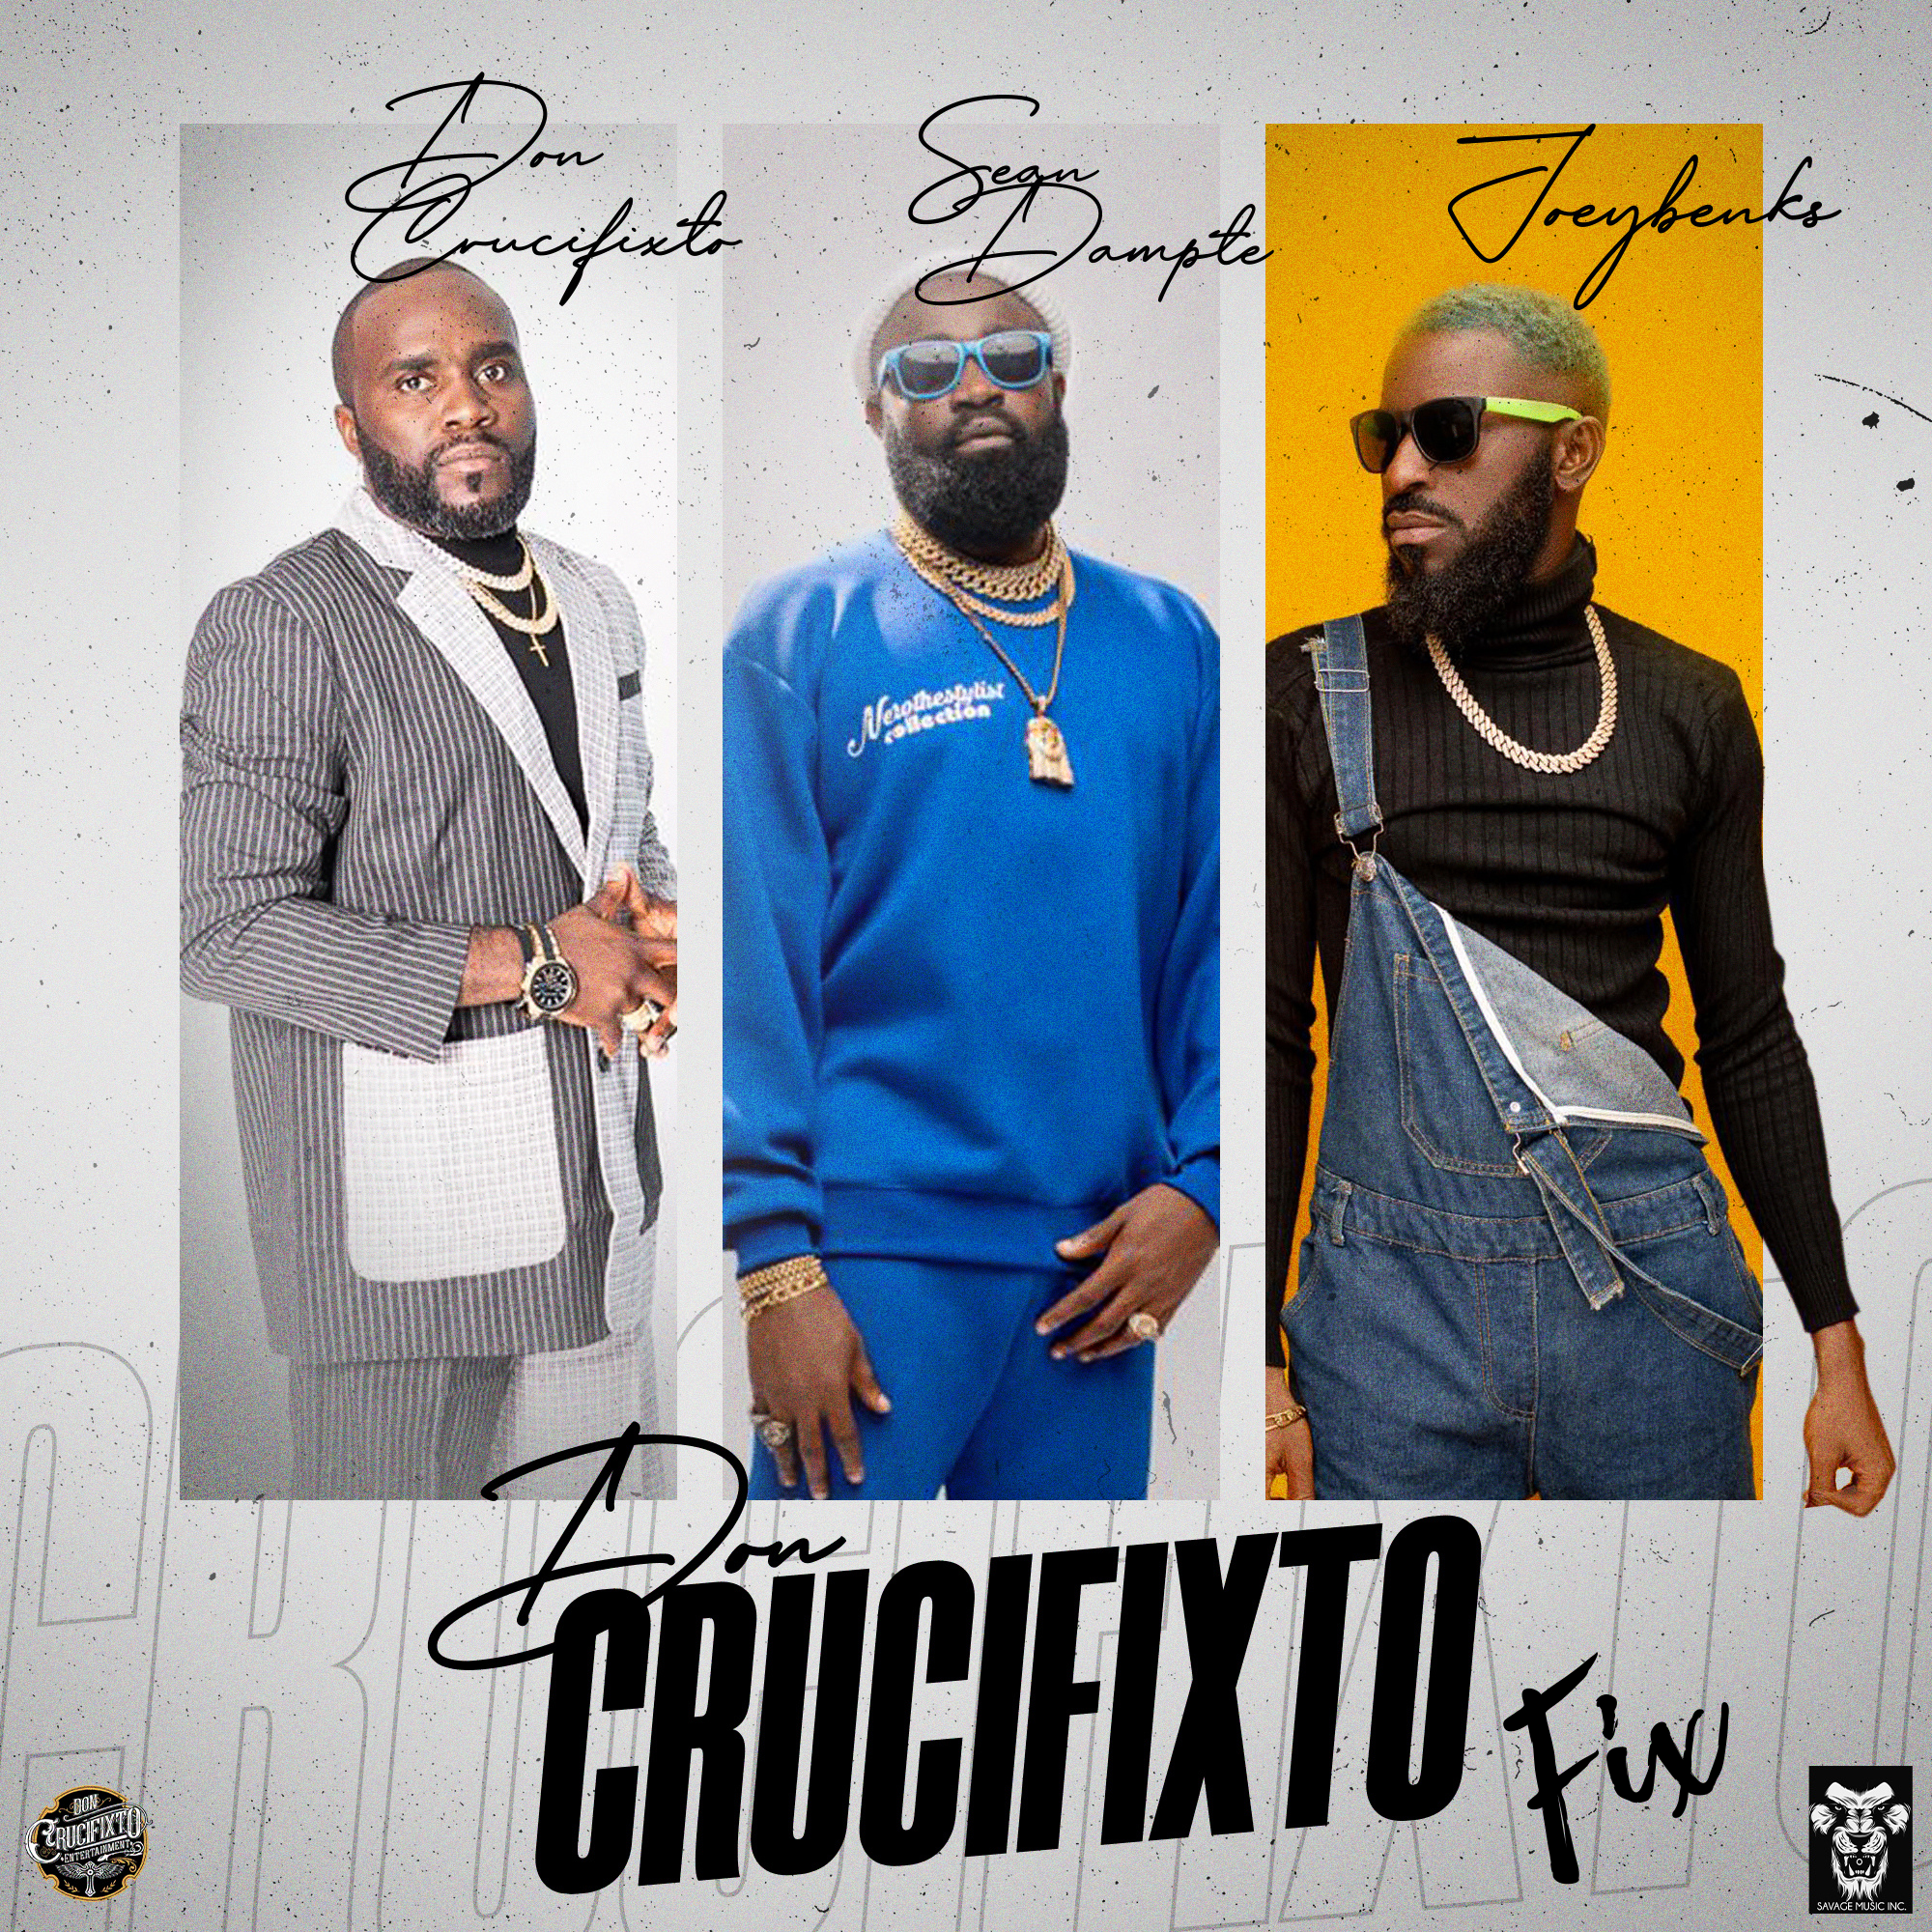 Don Crucifixto - Fix; A Marvellous New Single Is Set For A Big Release Featuring DC, Sean Dampte & Joey Benks